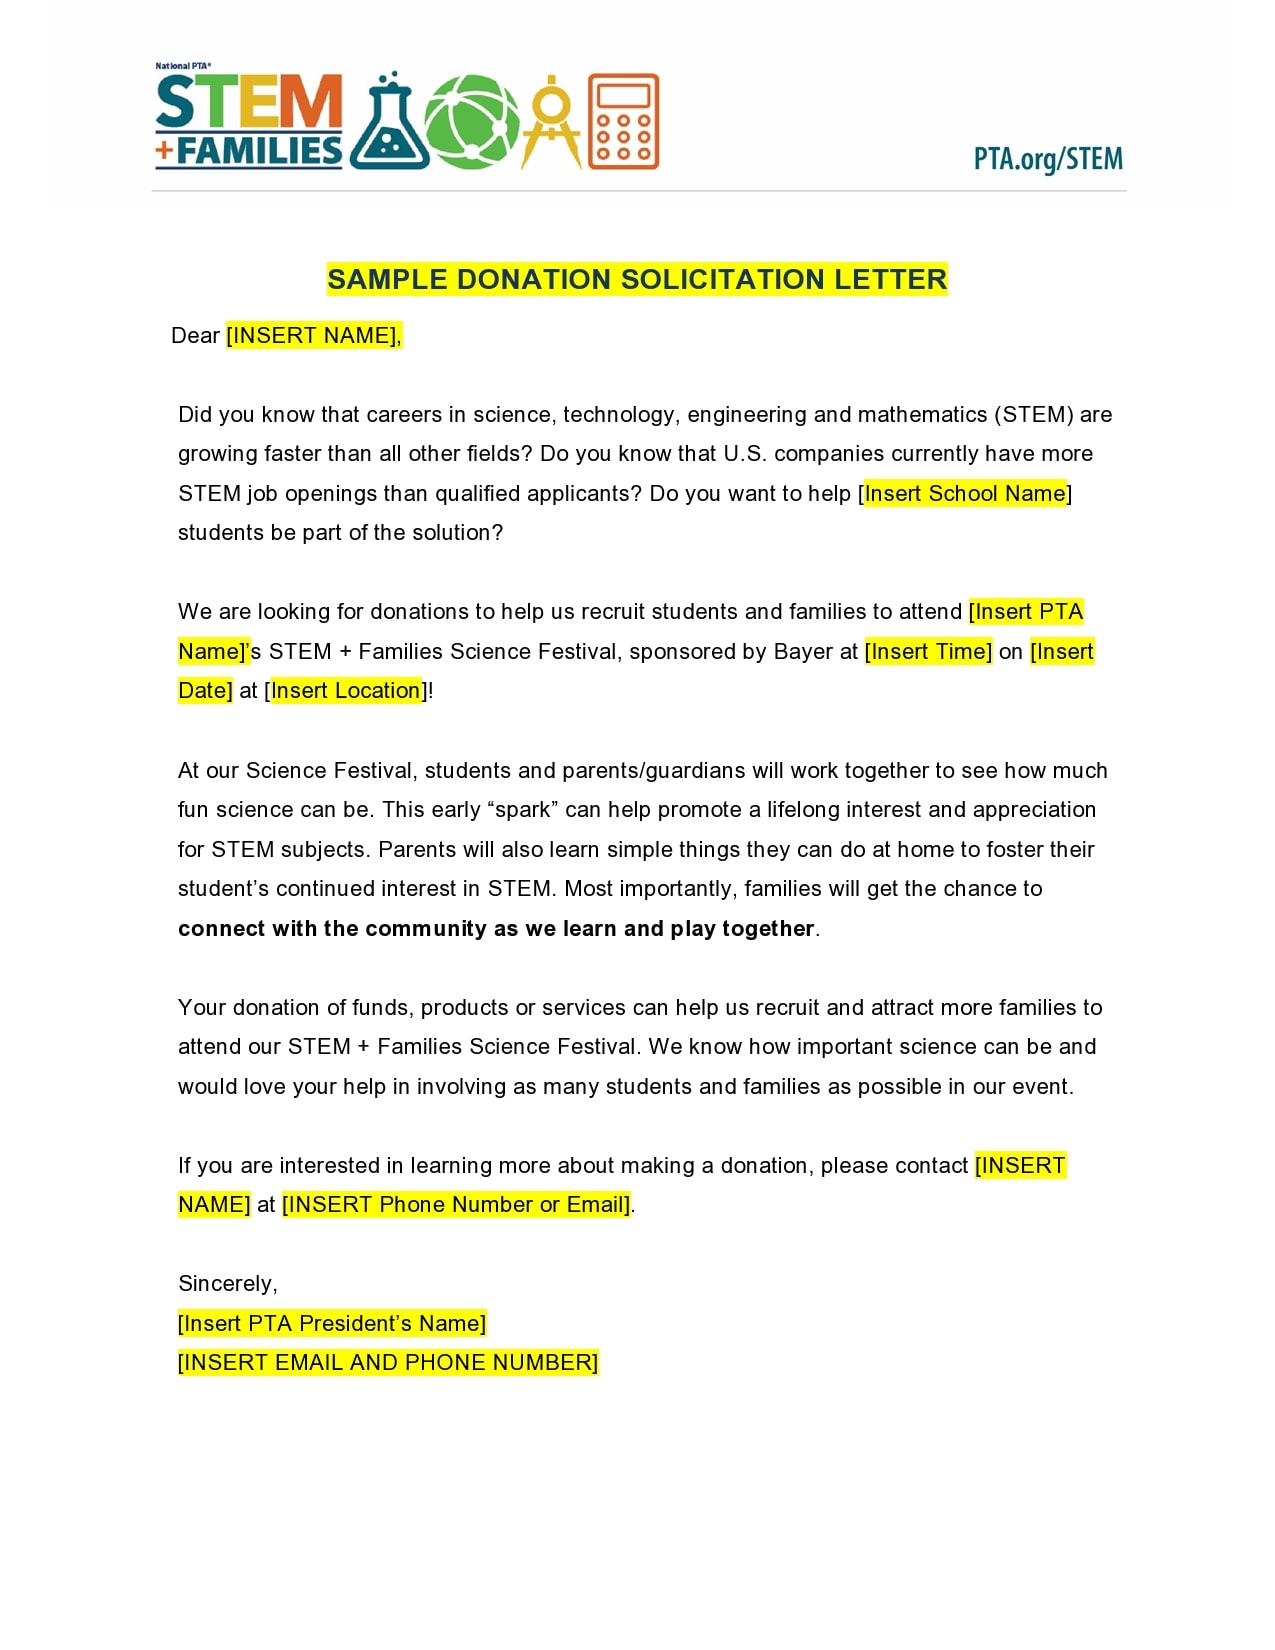 22 Editable Solicitation Letters (Free Samples) - TemplateArchive